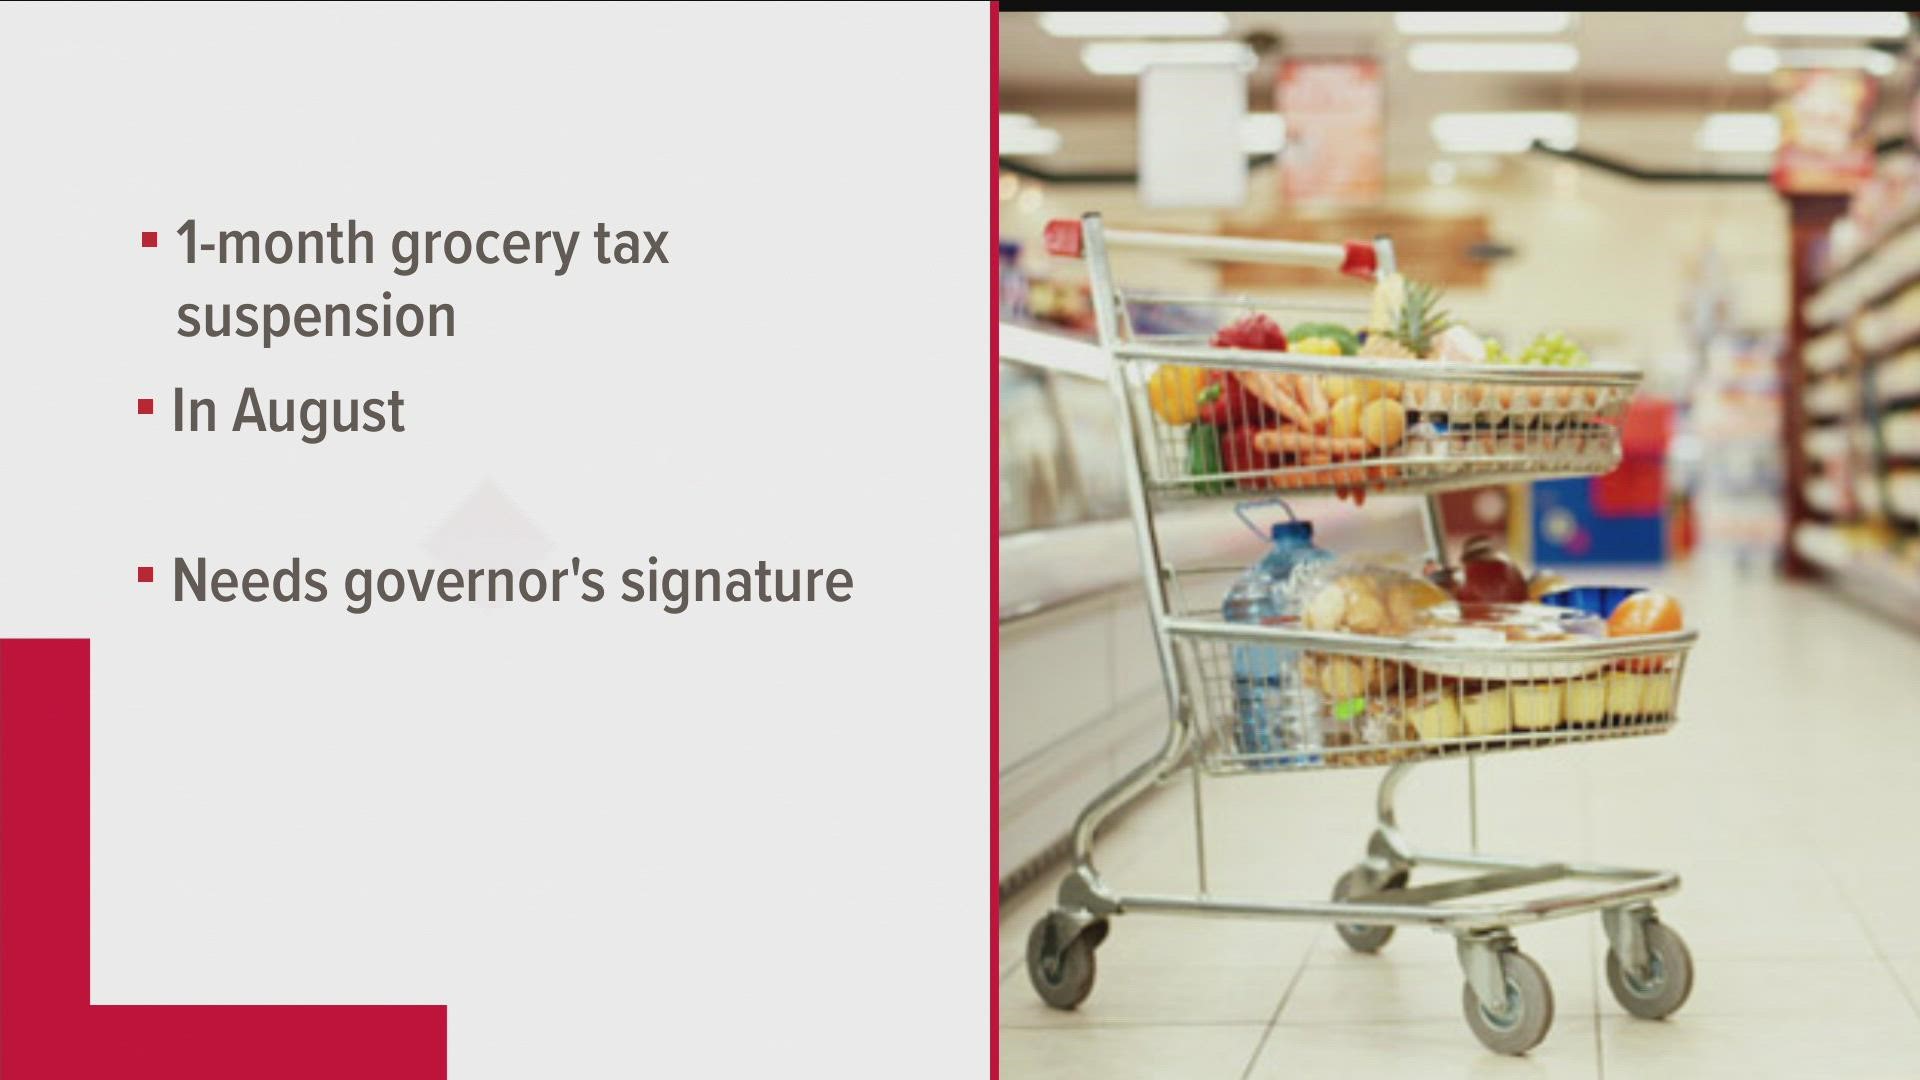 If the governor signs the budget, grocery sales taxes will be suspended for the month of August.